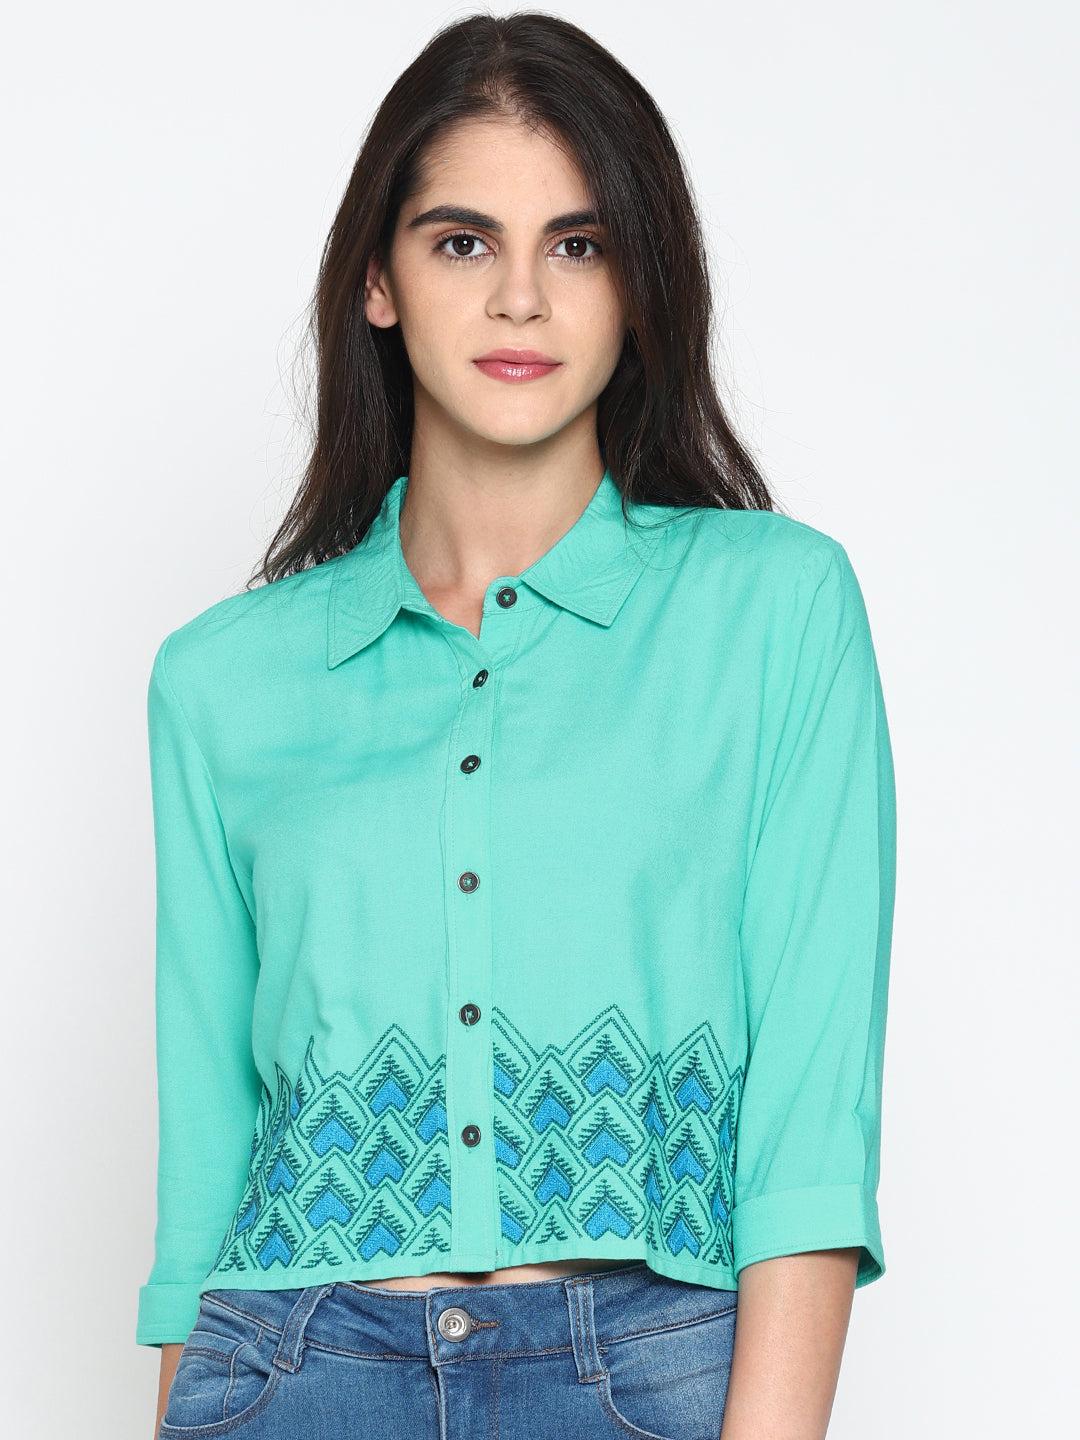 blue embroidered shirt